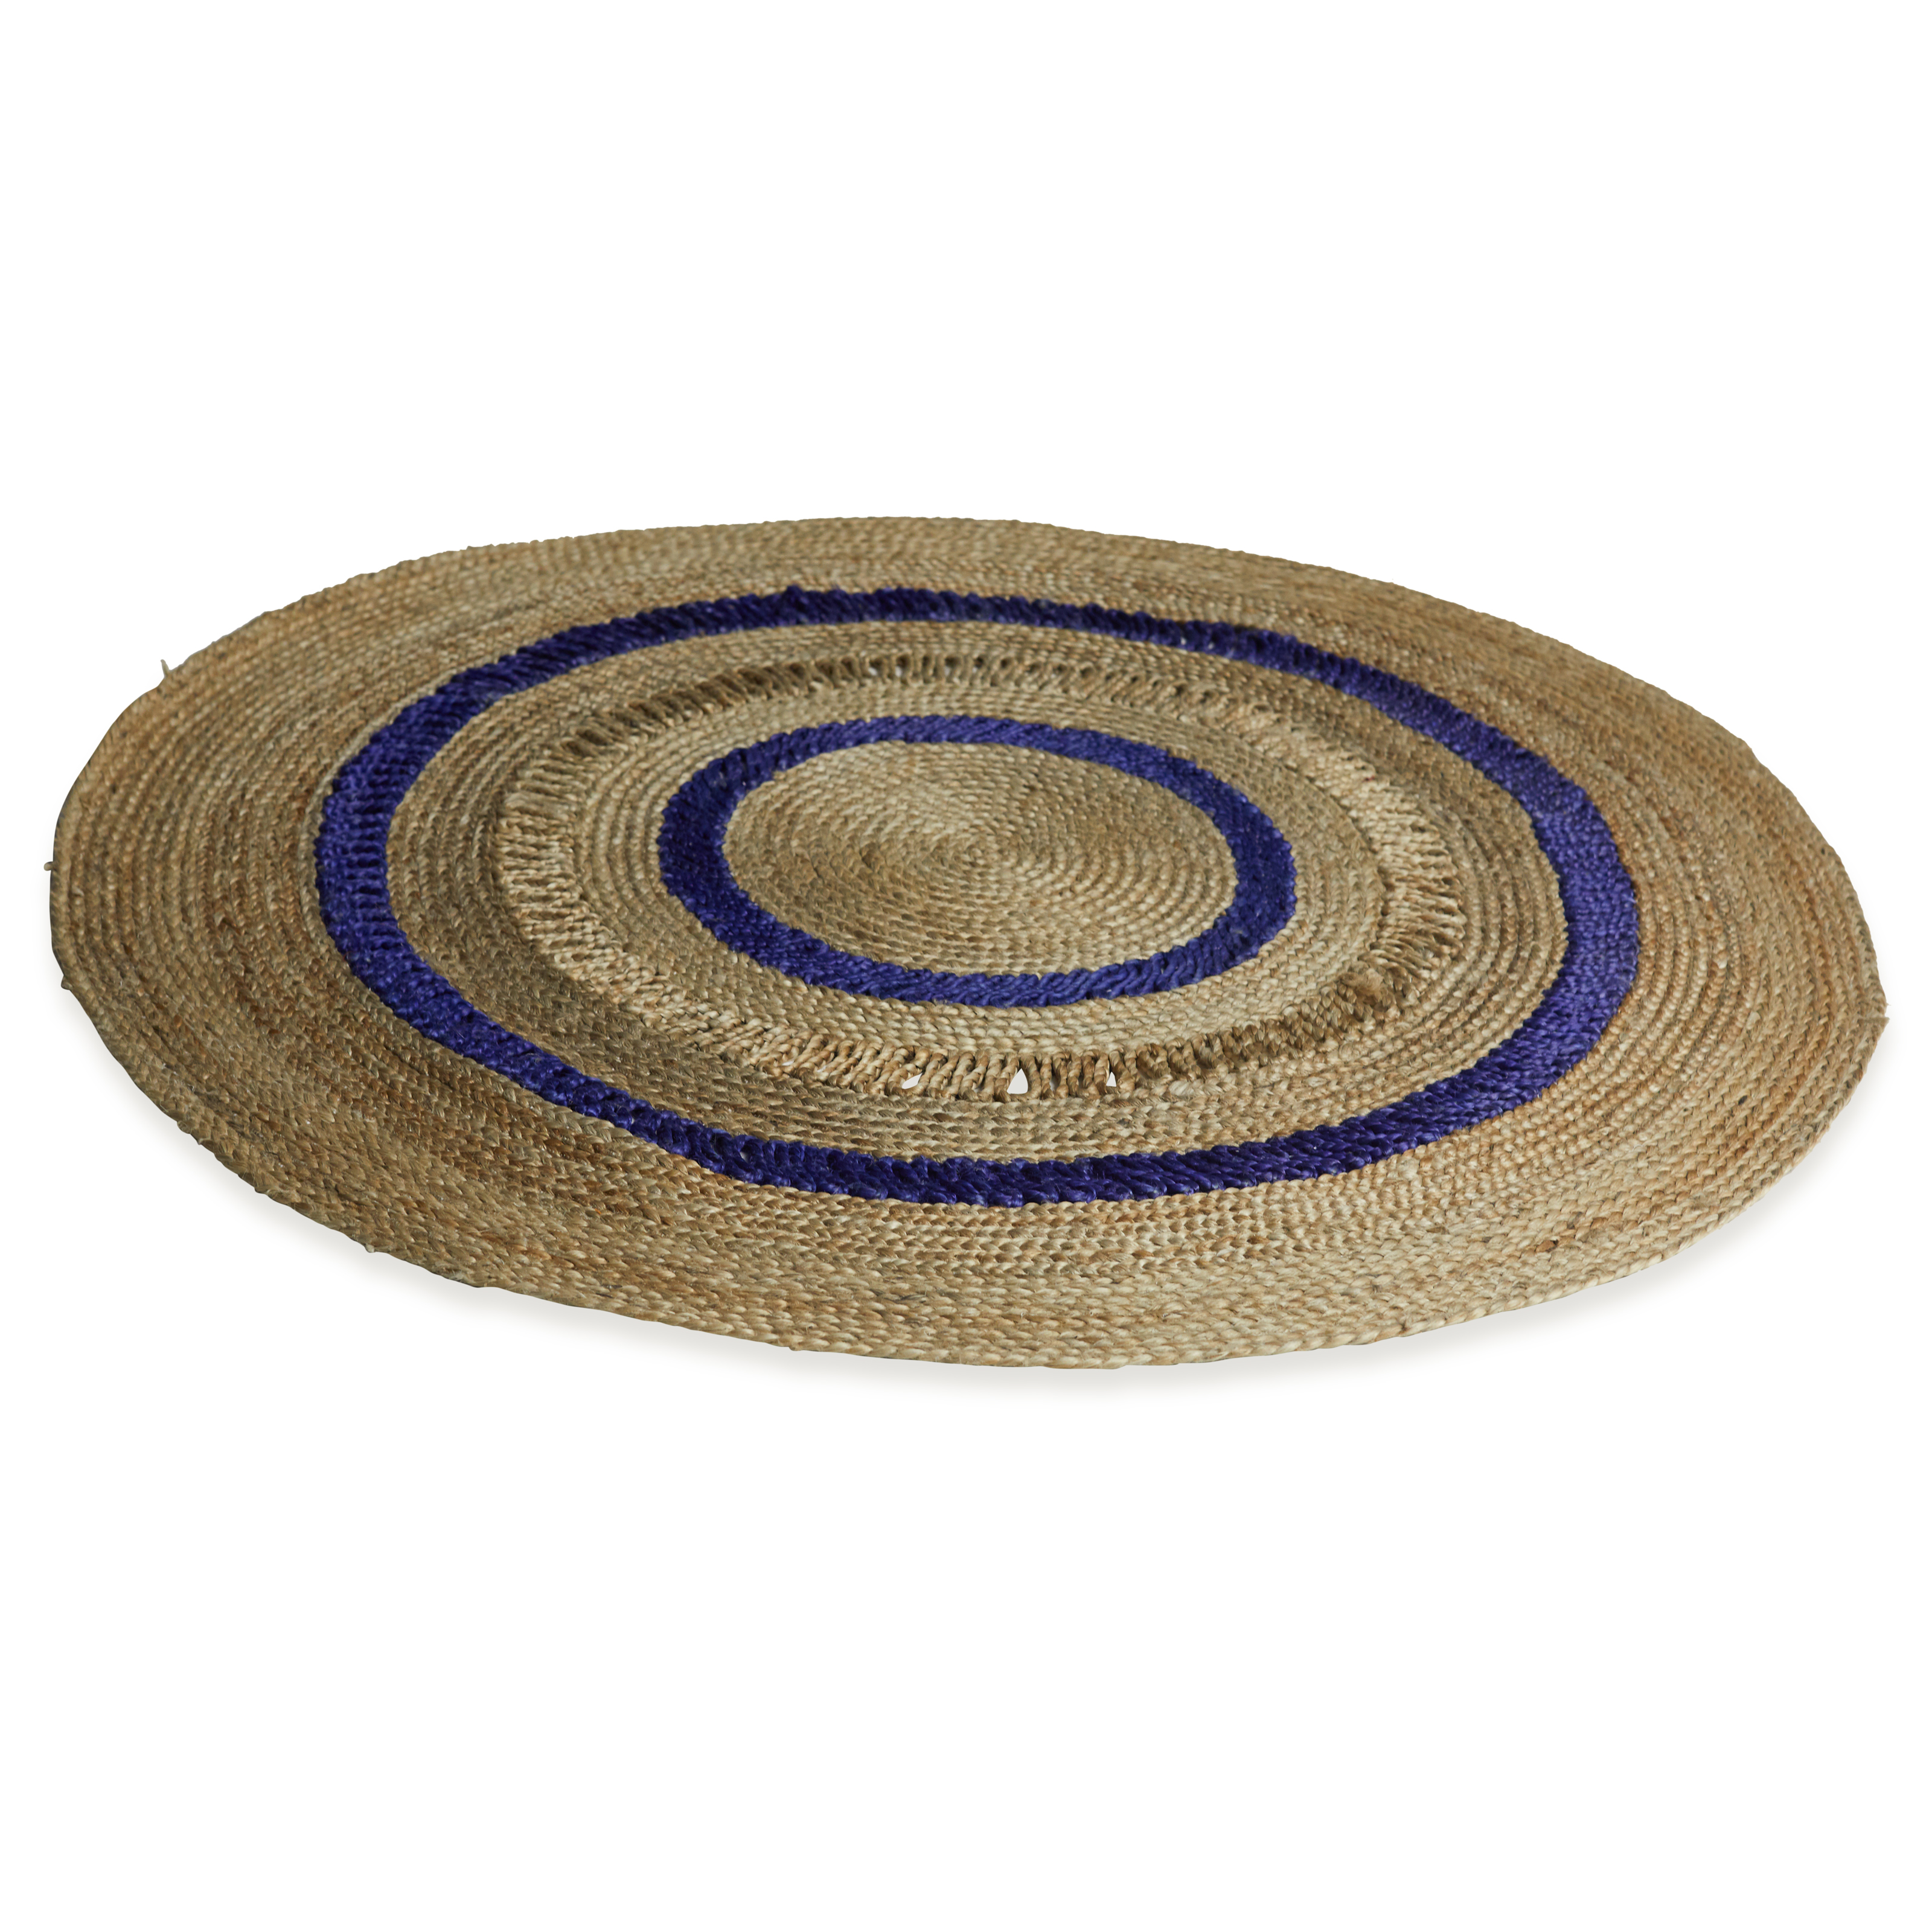 Round Blue Stripe Jute Area Rug by Drew Barrymore Flower Home - image 2 of 6